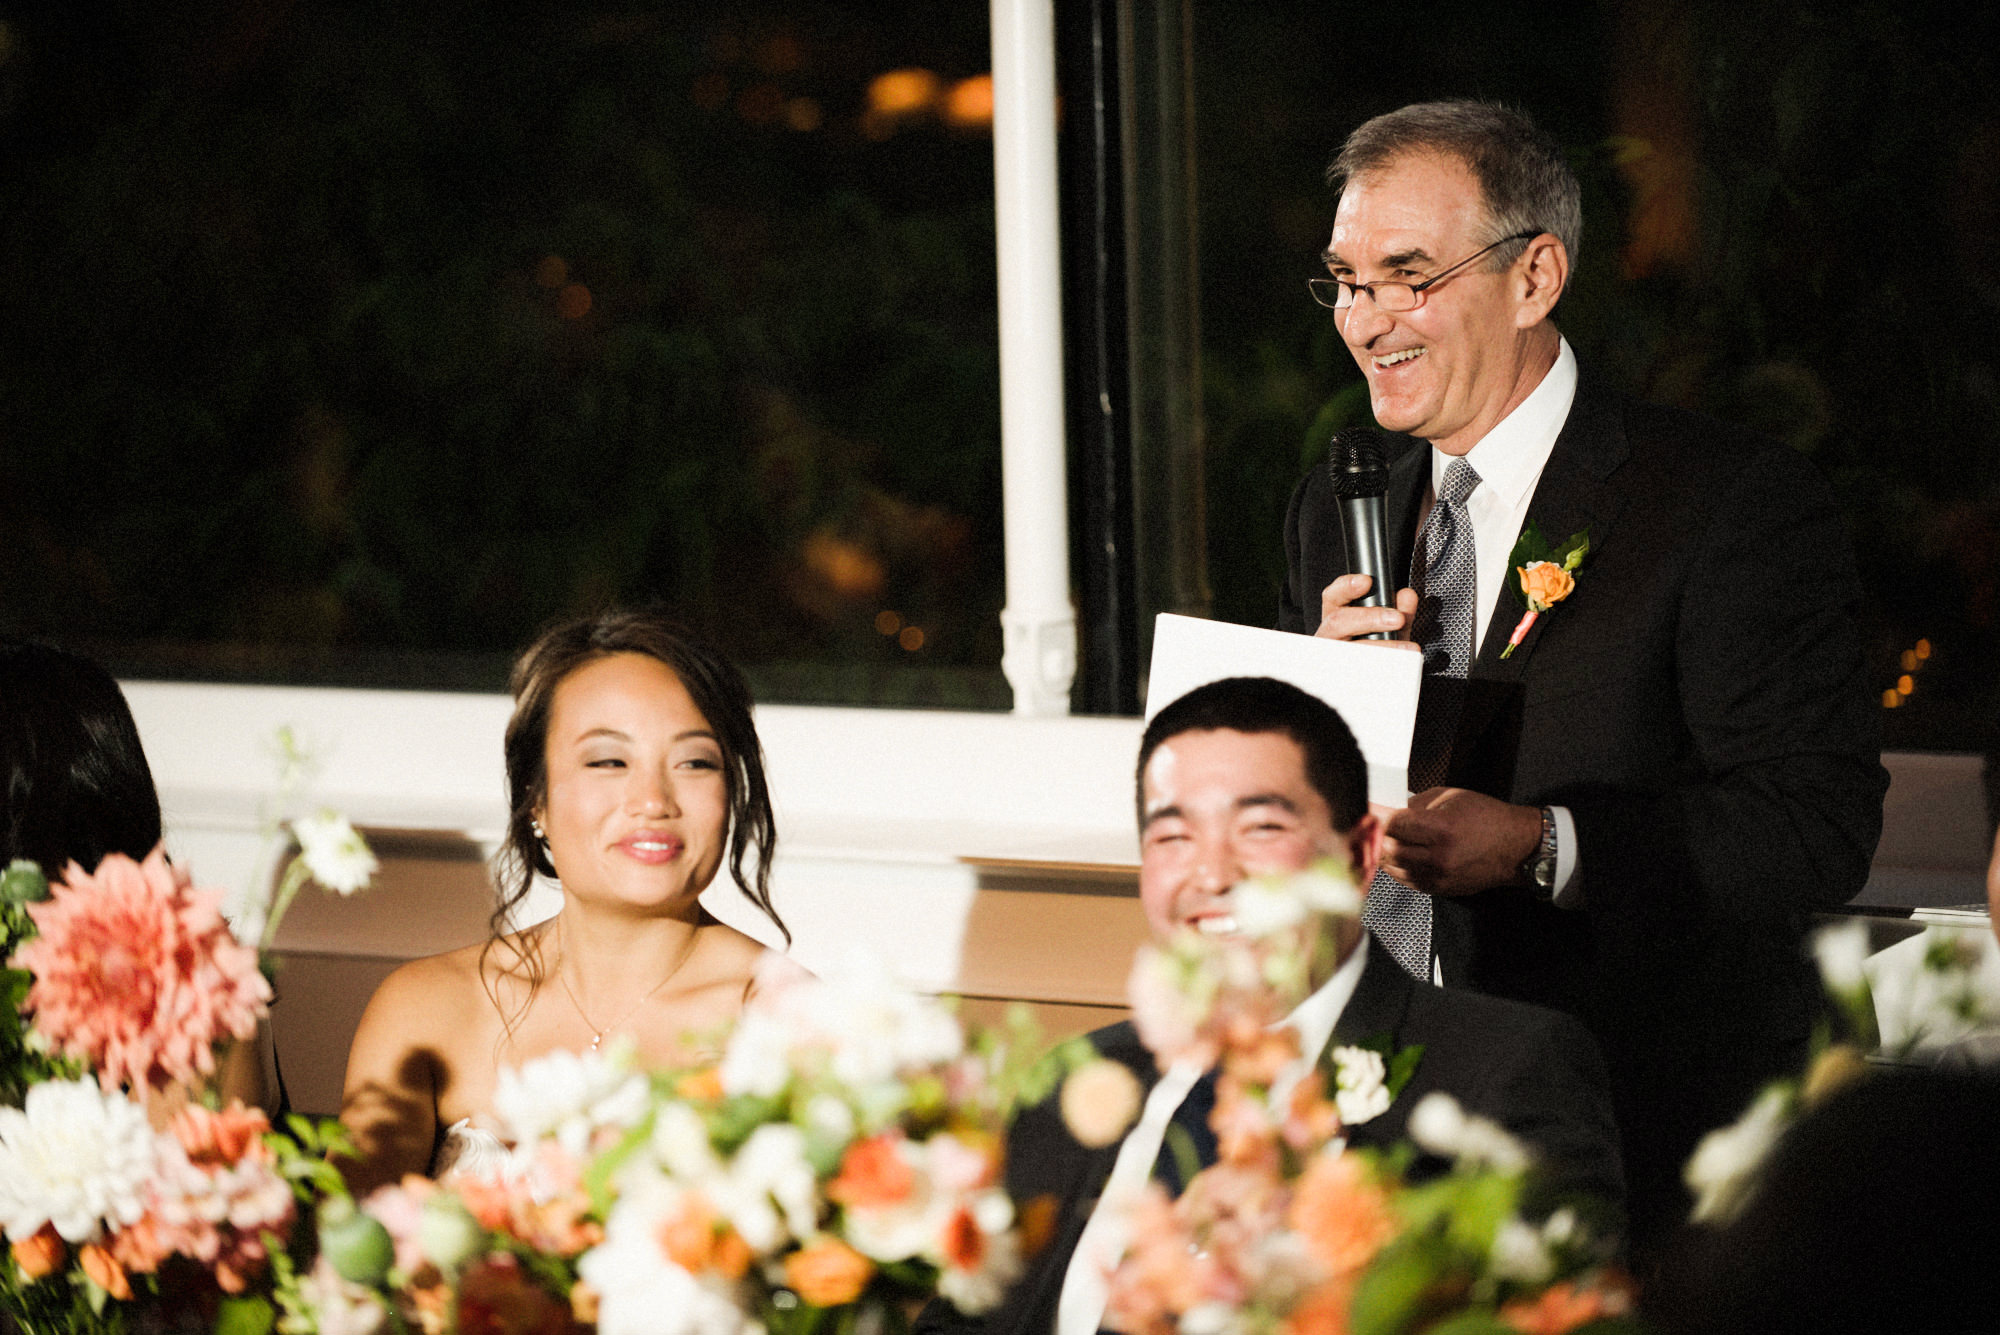 Jeremy's dad toasts the happy couple